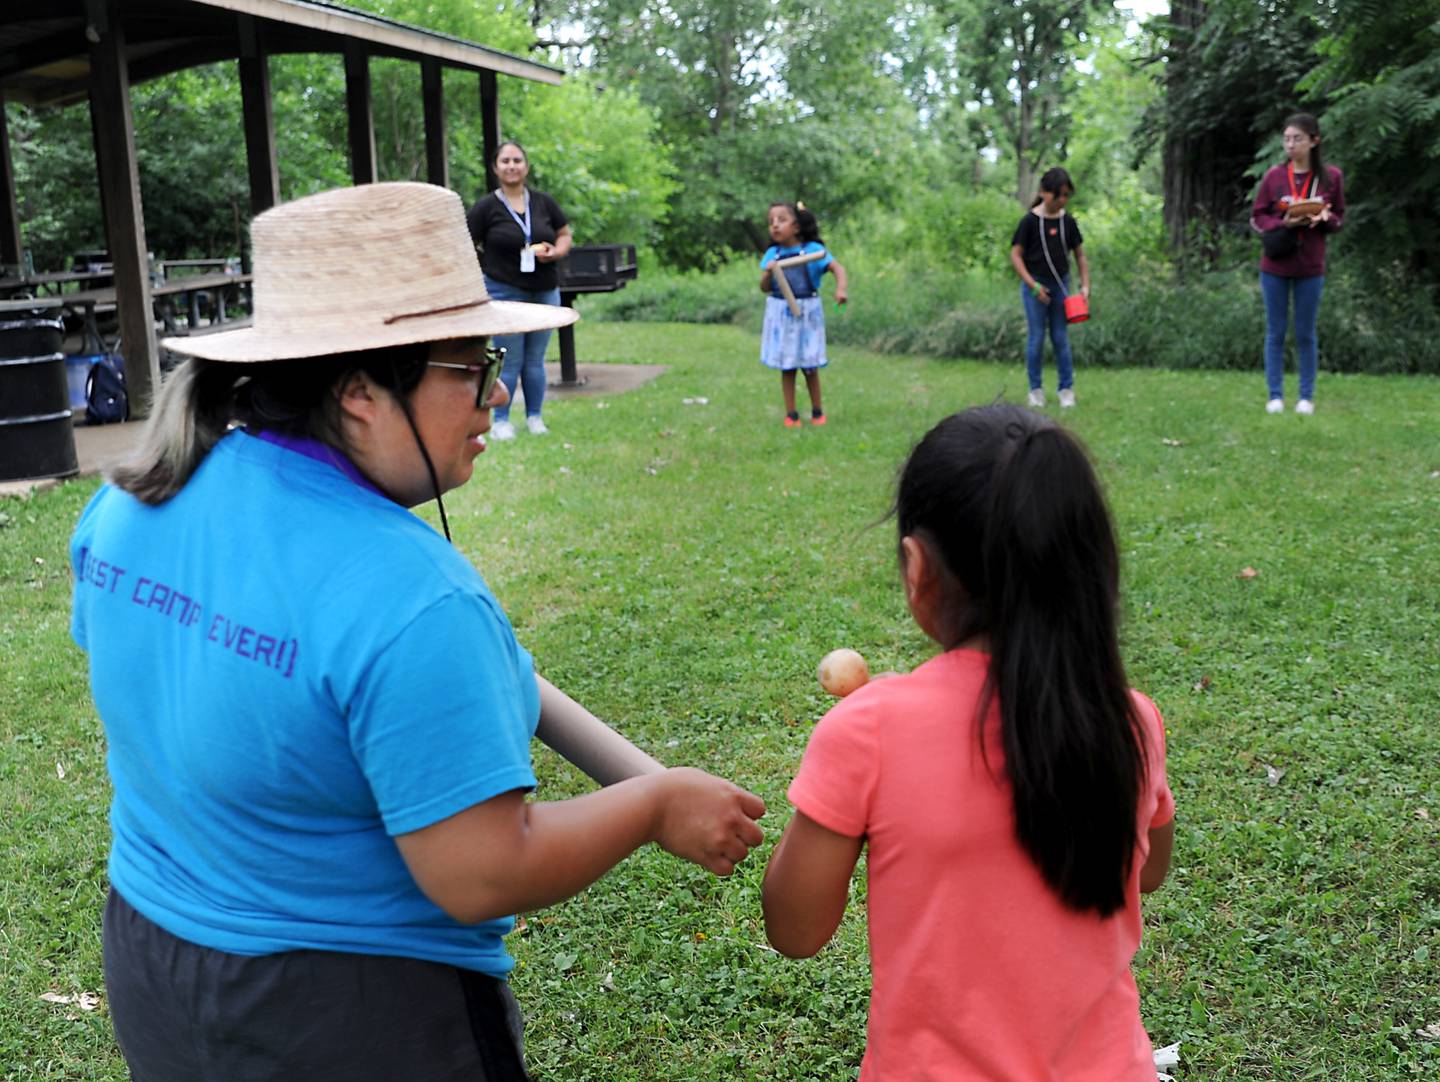 Carmen Cruz listens to Alondra Quinones as they share their feelings in a final drum circle during a field trip Wednesday, July 6, 2022, to the Harrison Benwell Conservation Area, 7055 McCullom Lake Road in Wonder Lake. The Youth and Family Center of McHenry County is hiring a social worker to assist with the mental health needs of those they help. The nonprofit is one of three receiving funds through United Way of Greater McHenry County as part of an Advance McHenry County grant.